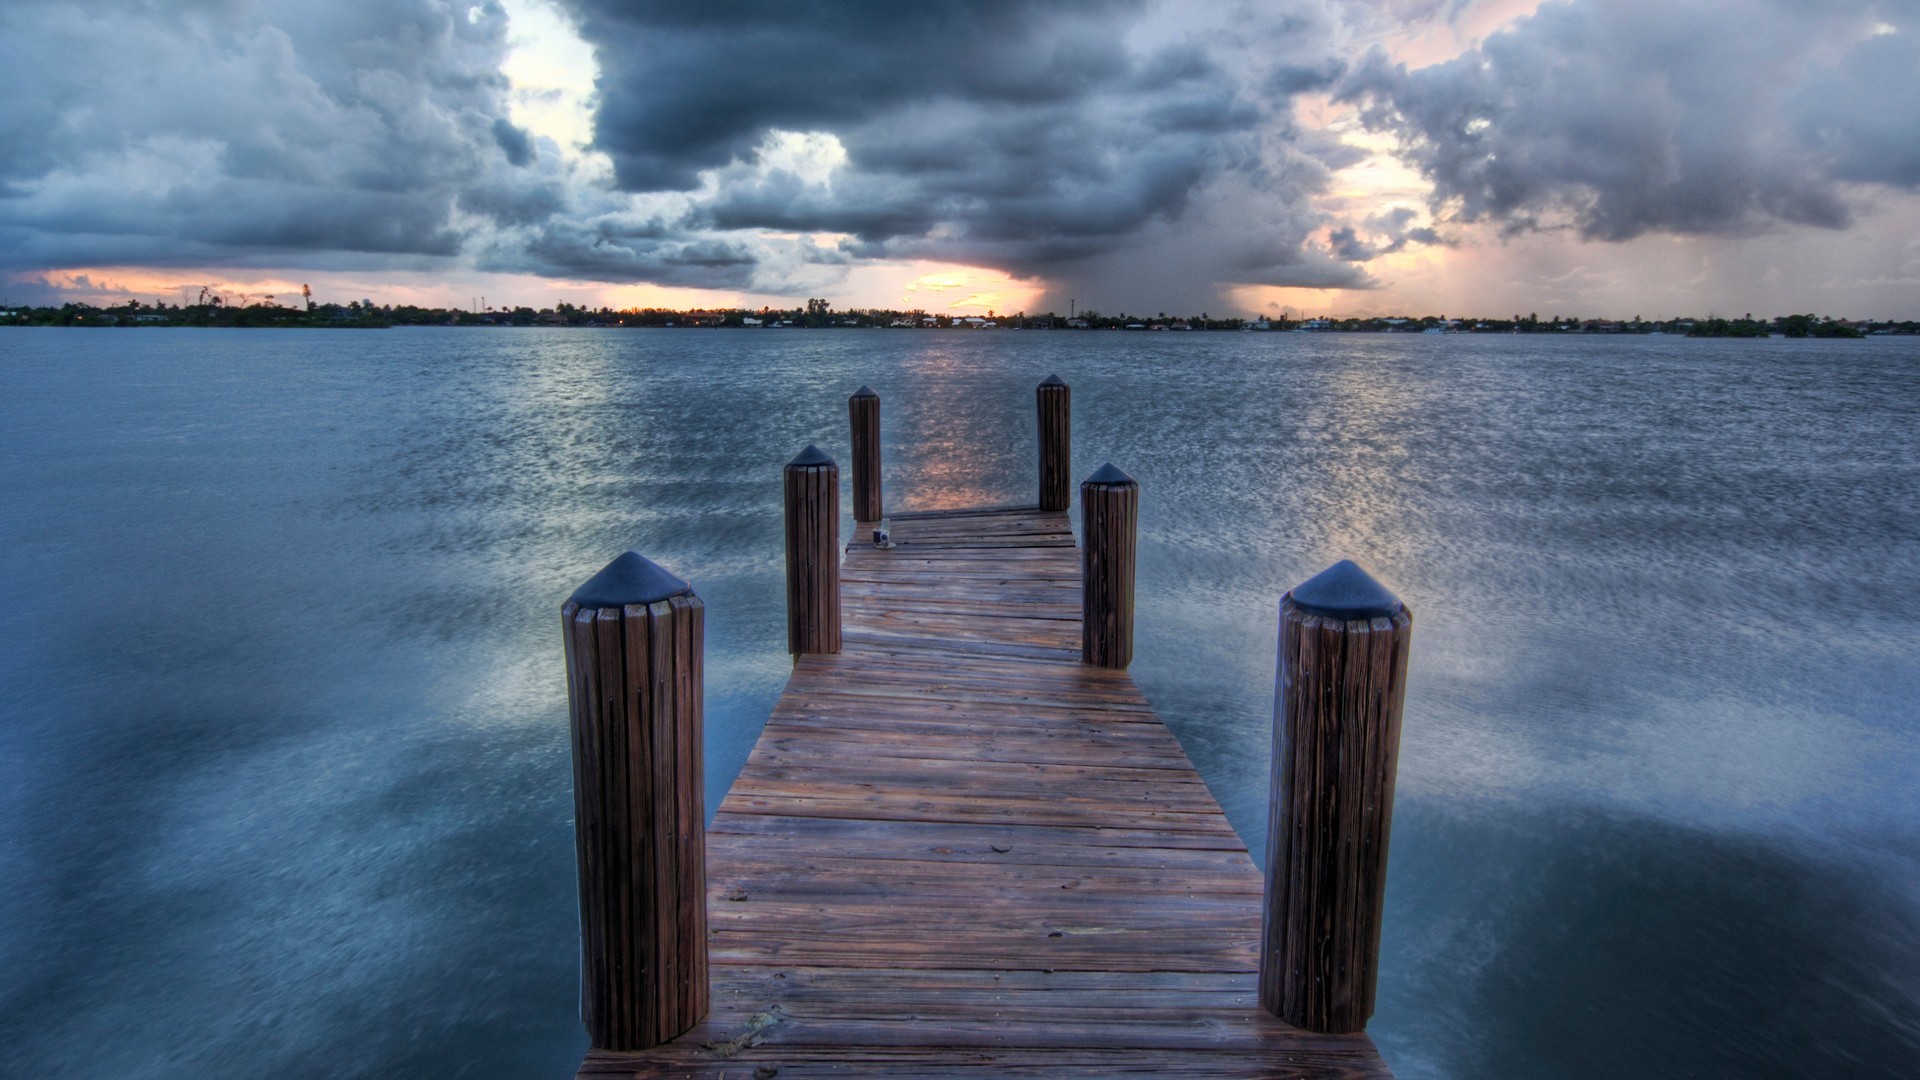 General 1920x1080 sea pier sky clouds HDR outdoors water